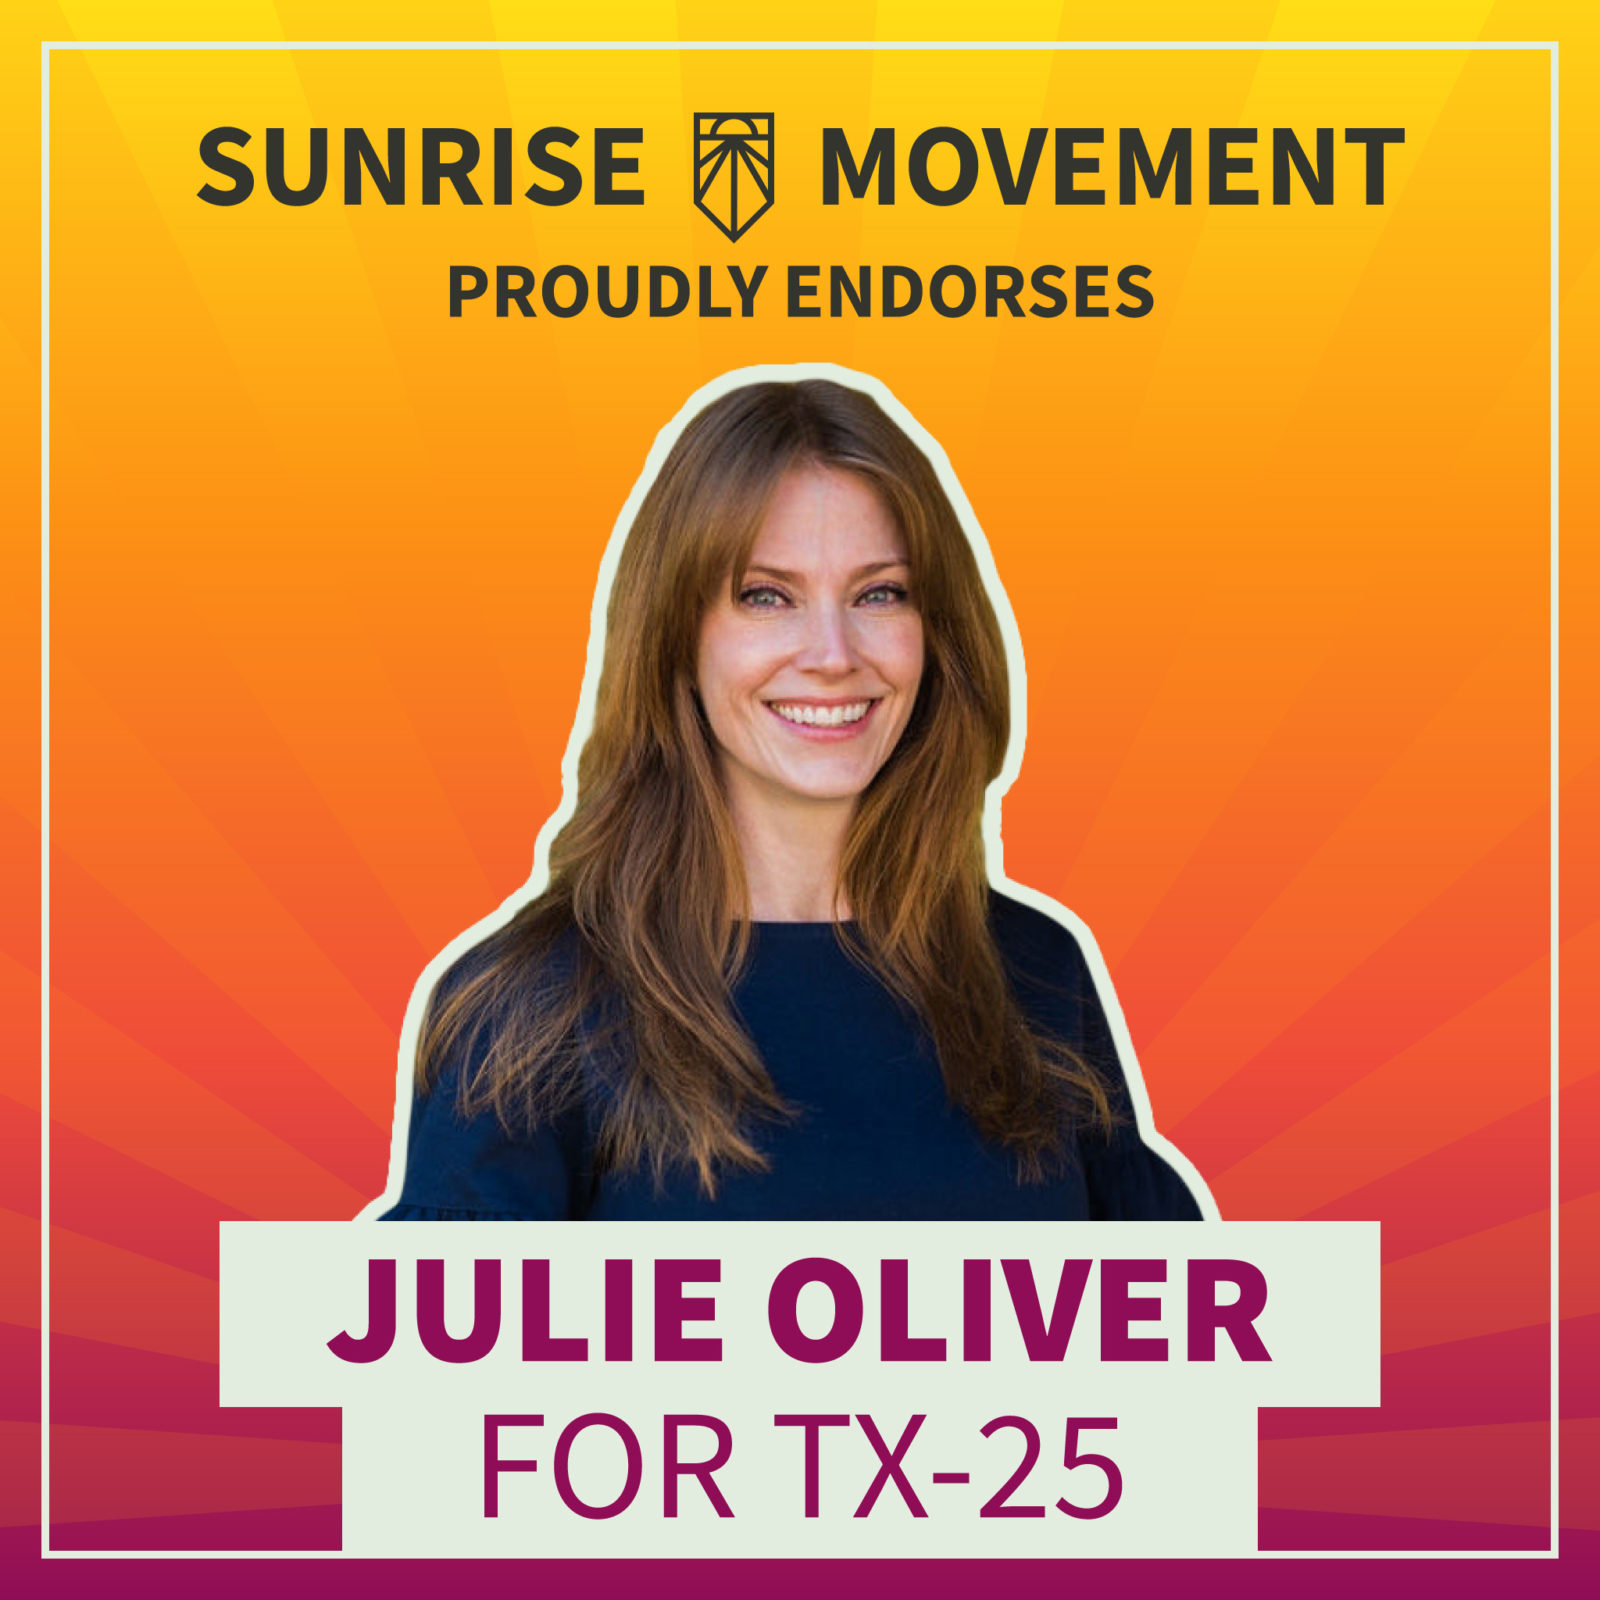 A photo of Julie Oliver with text: Sunrise Movement proudly endorses Julie Oliver for TX-25.